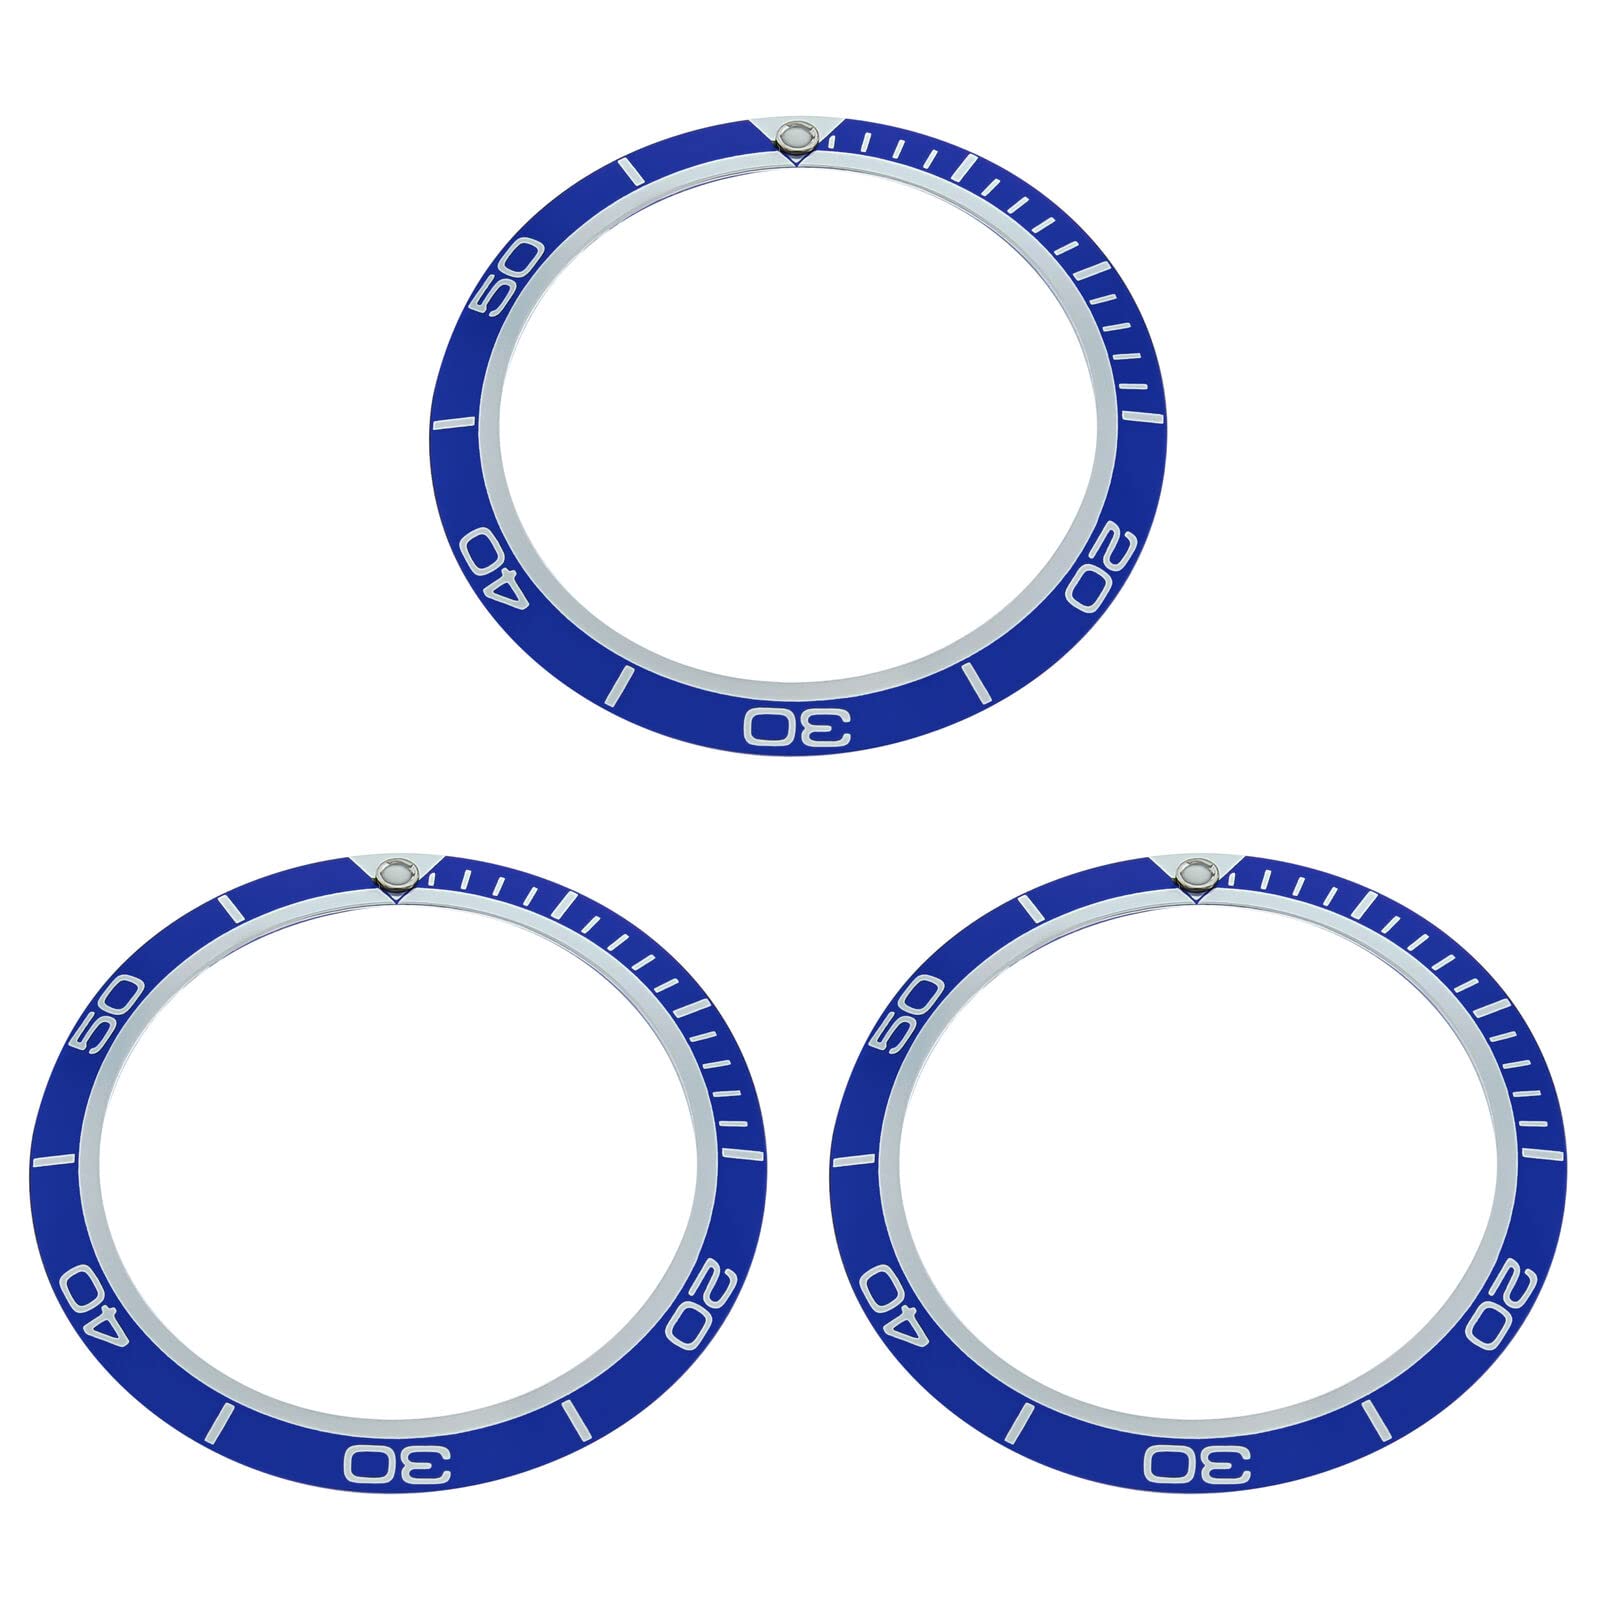 Ewatchparts 3 BEZEL INSERT COMPATIBLE WITH OMEGA WATCH SEAMASTER PLANET OCEAN 45MM OR 45.50MM BLUE TOP Q